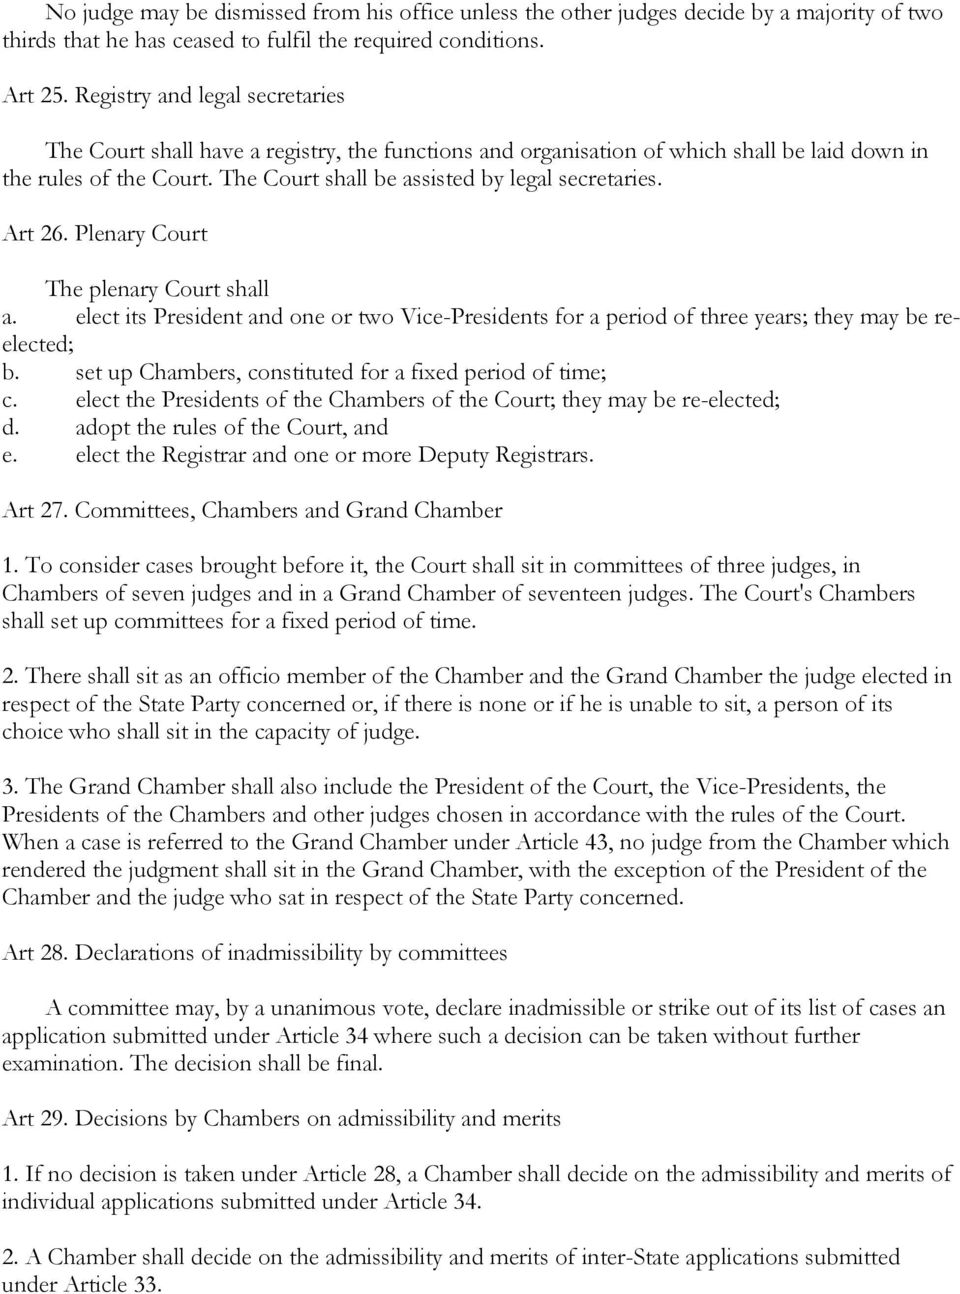 Art 26. Plenary Court The plenary Court shall a. elect its President and one or two Vice-Presidents for a period of three years; they may be reelected; b.